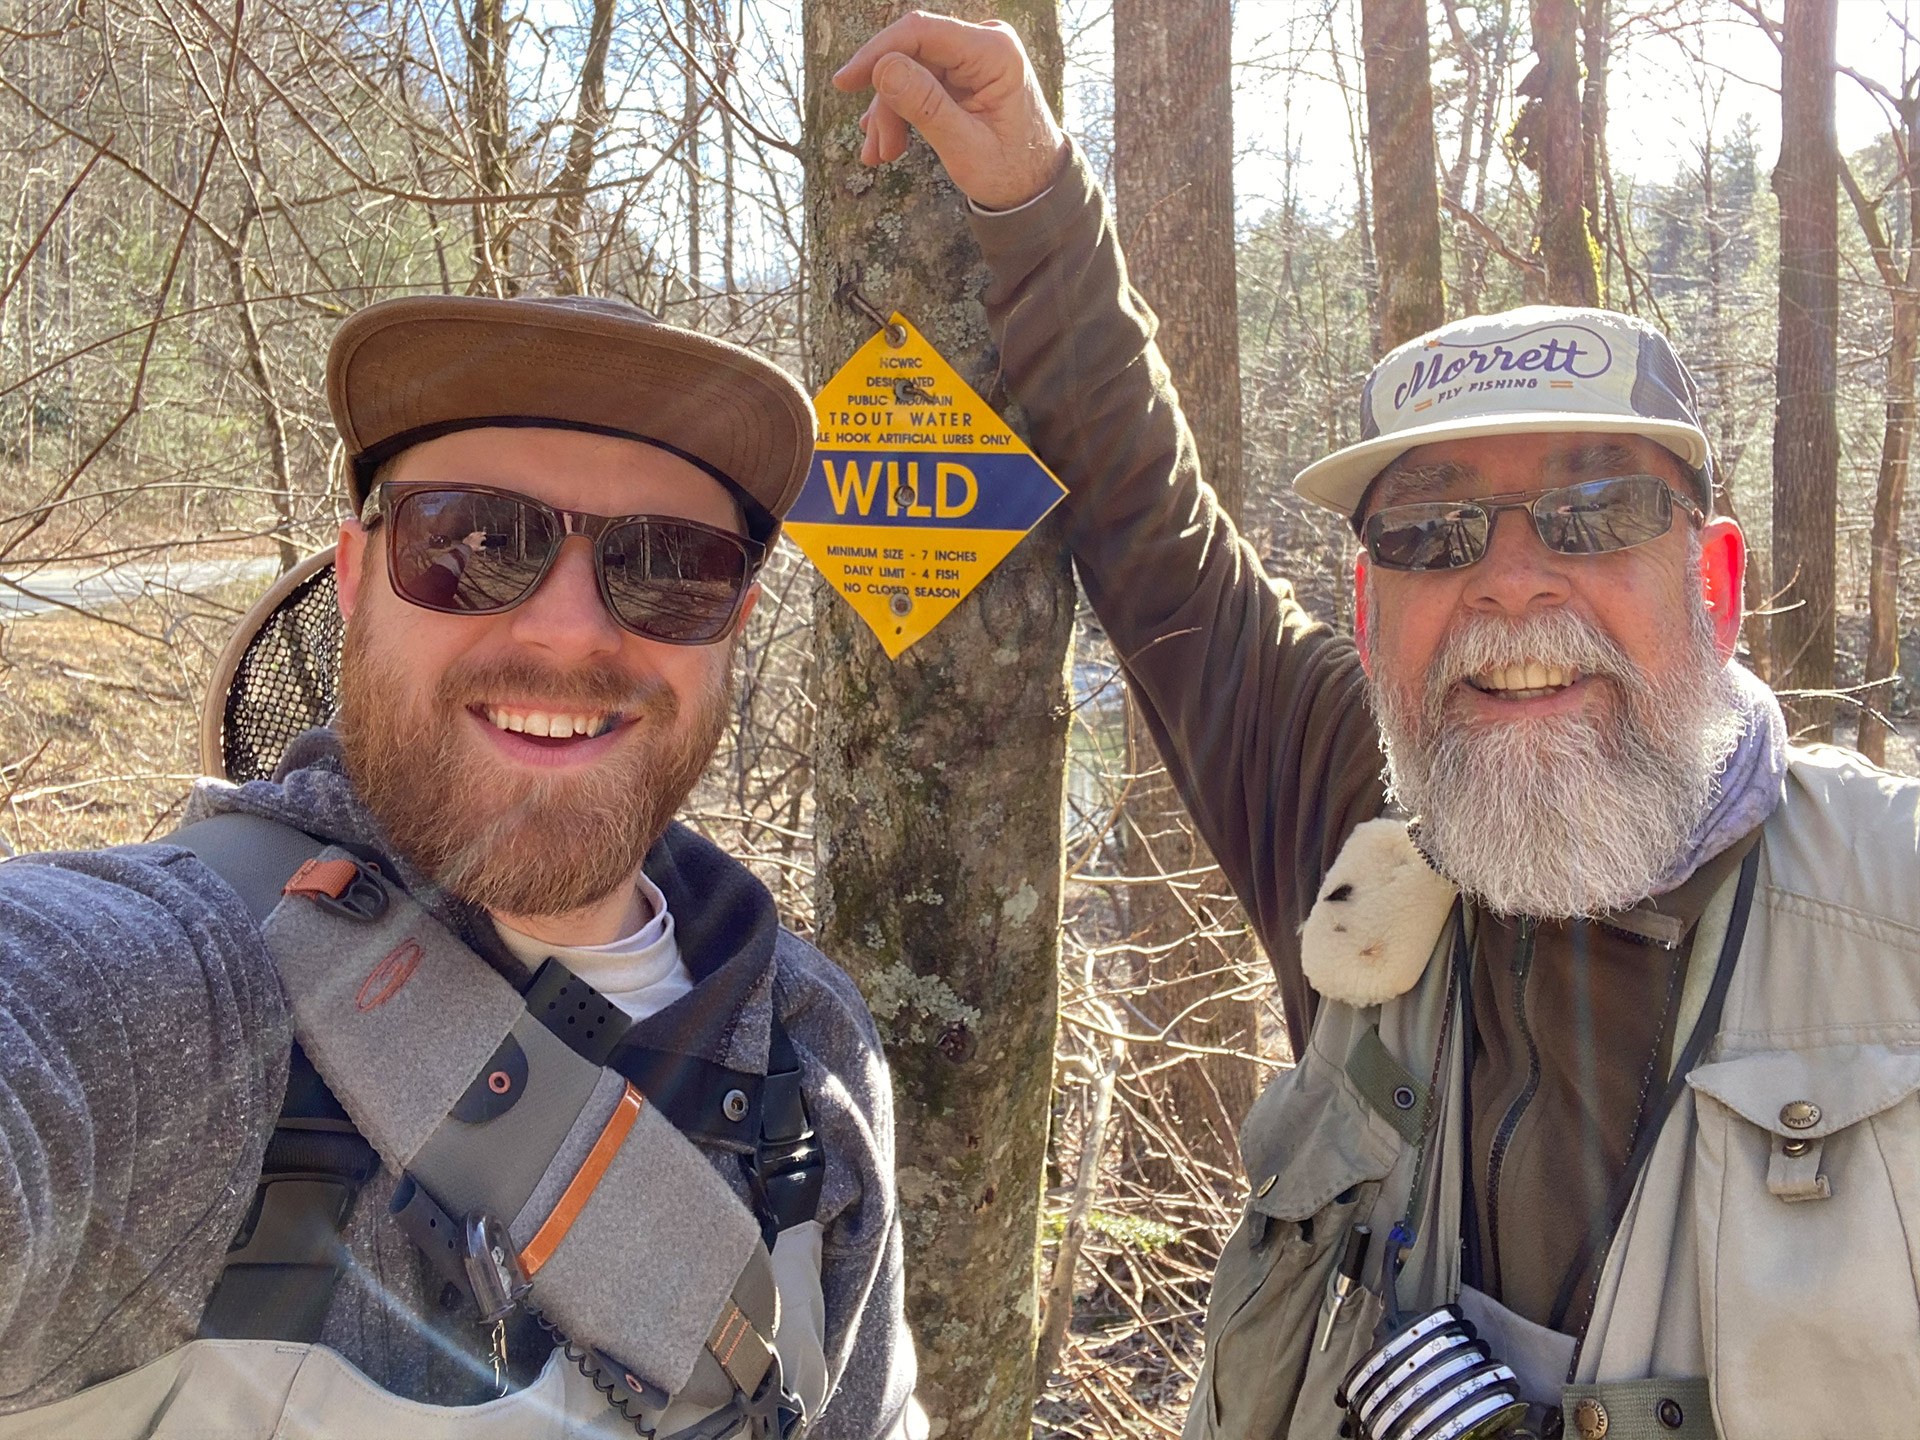 A young man in his thirties, Andy, alongside an older gentleman in his sixties, Greg, standing in front of a wild trout sign